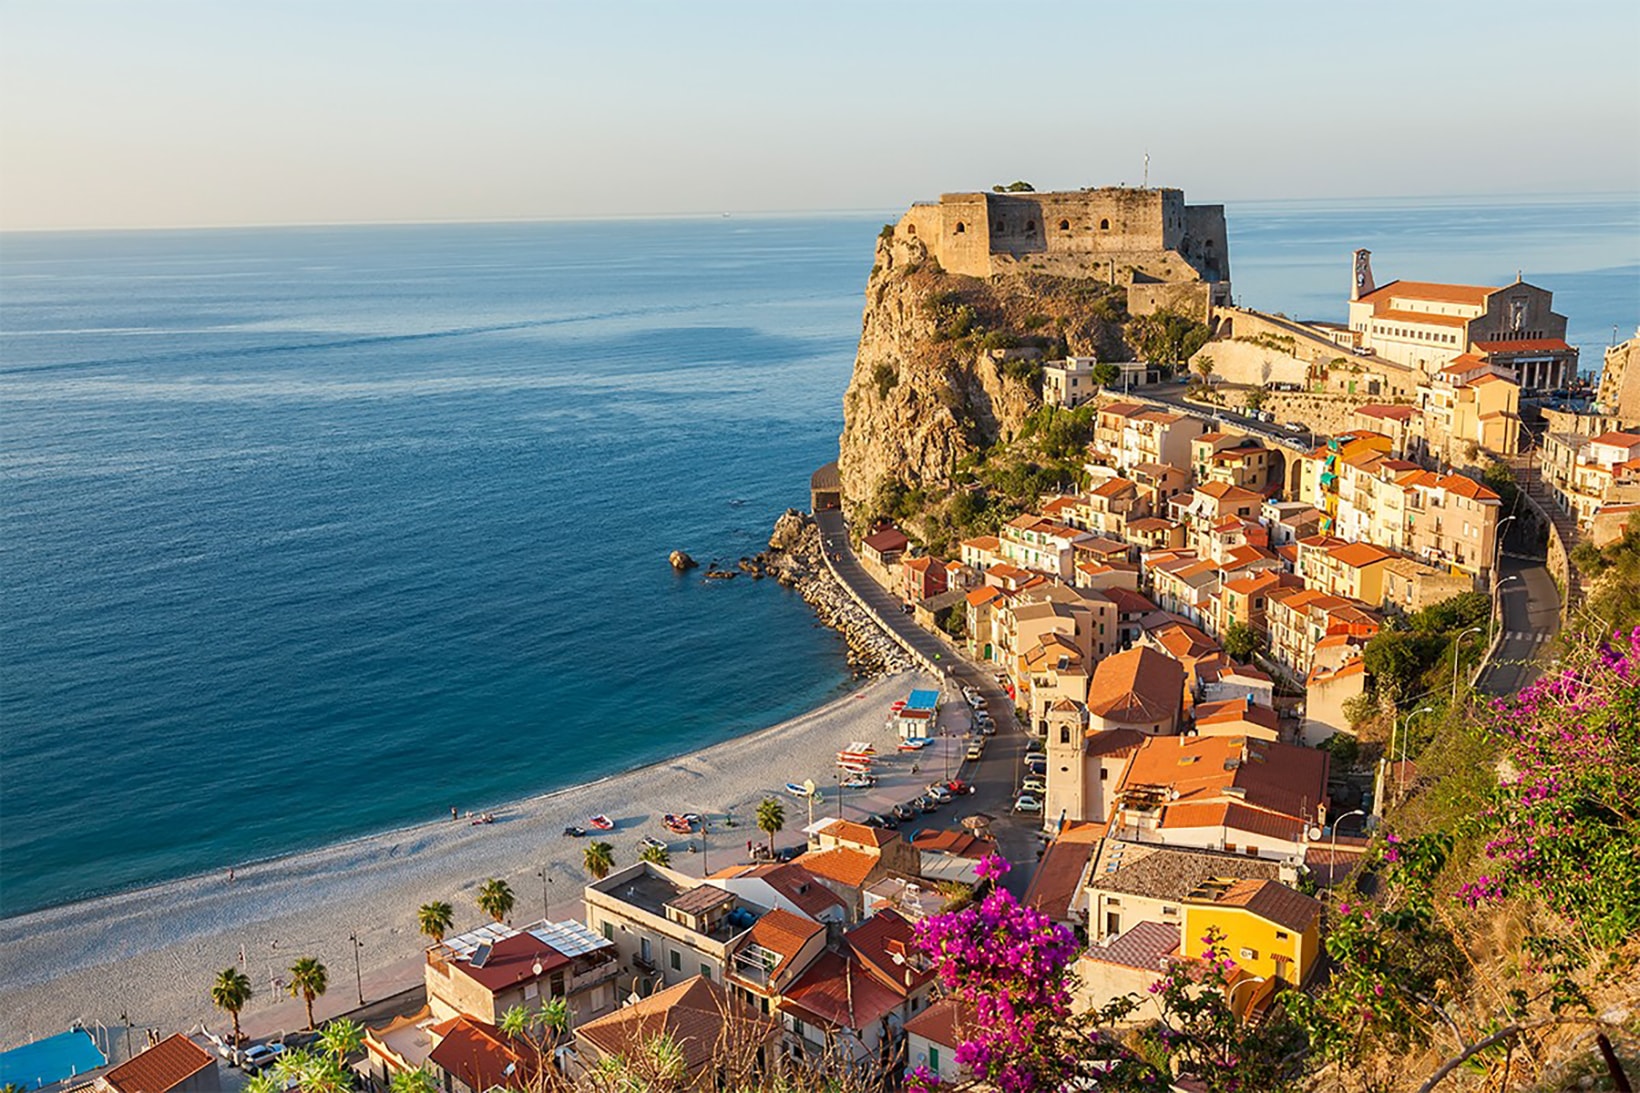 calabria south italy 33000 usd immigration program application travel village 